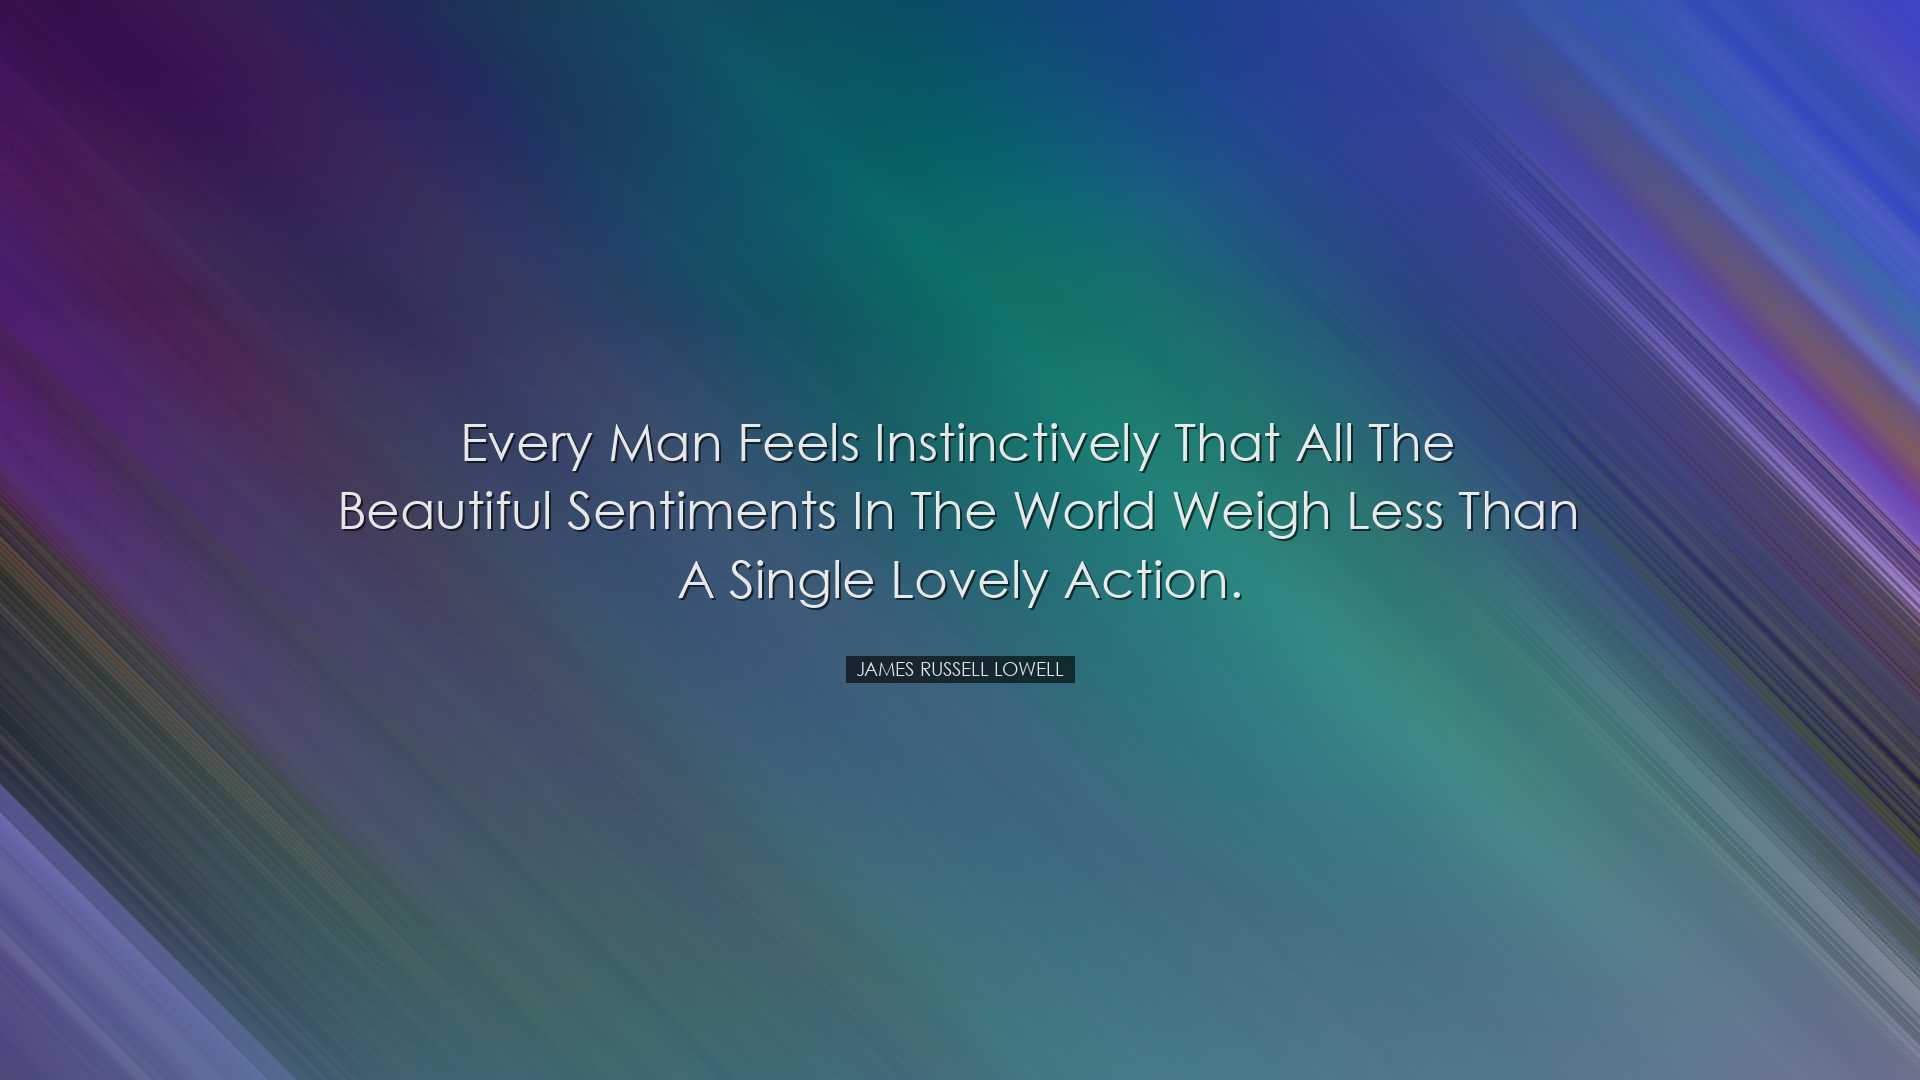 Every man feels instinctively that all the beautiful sentiments in